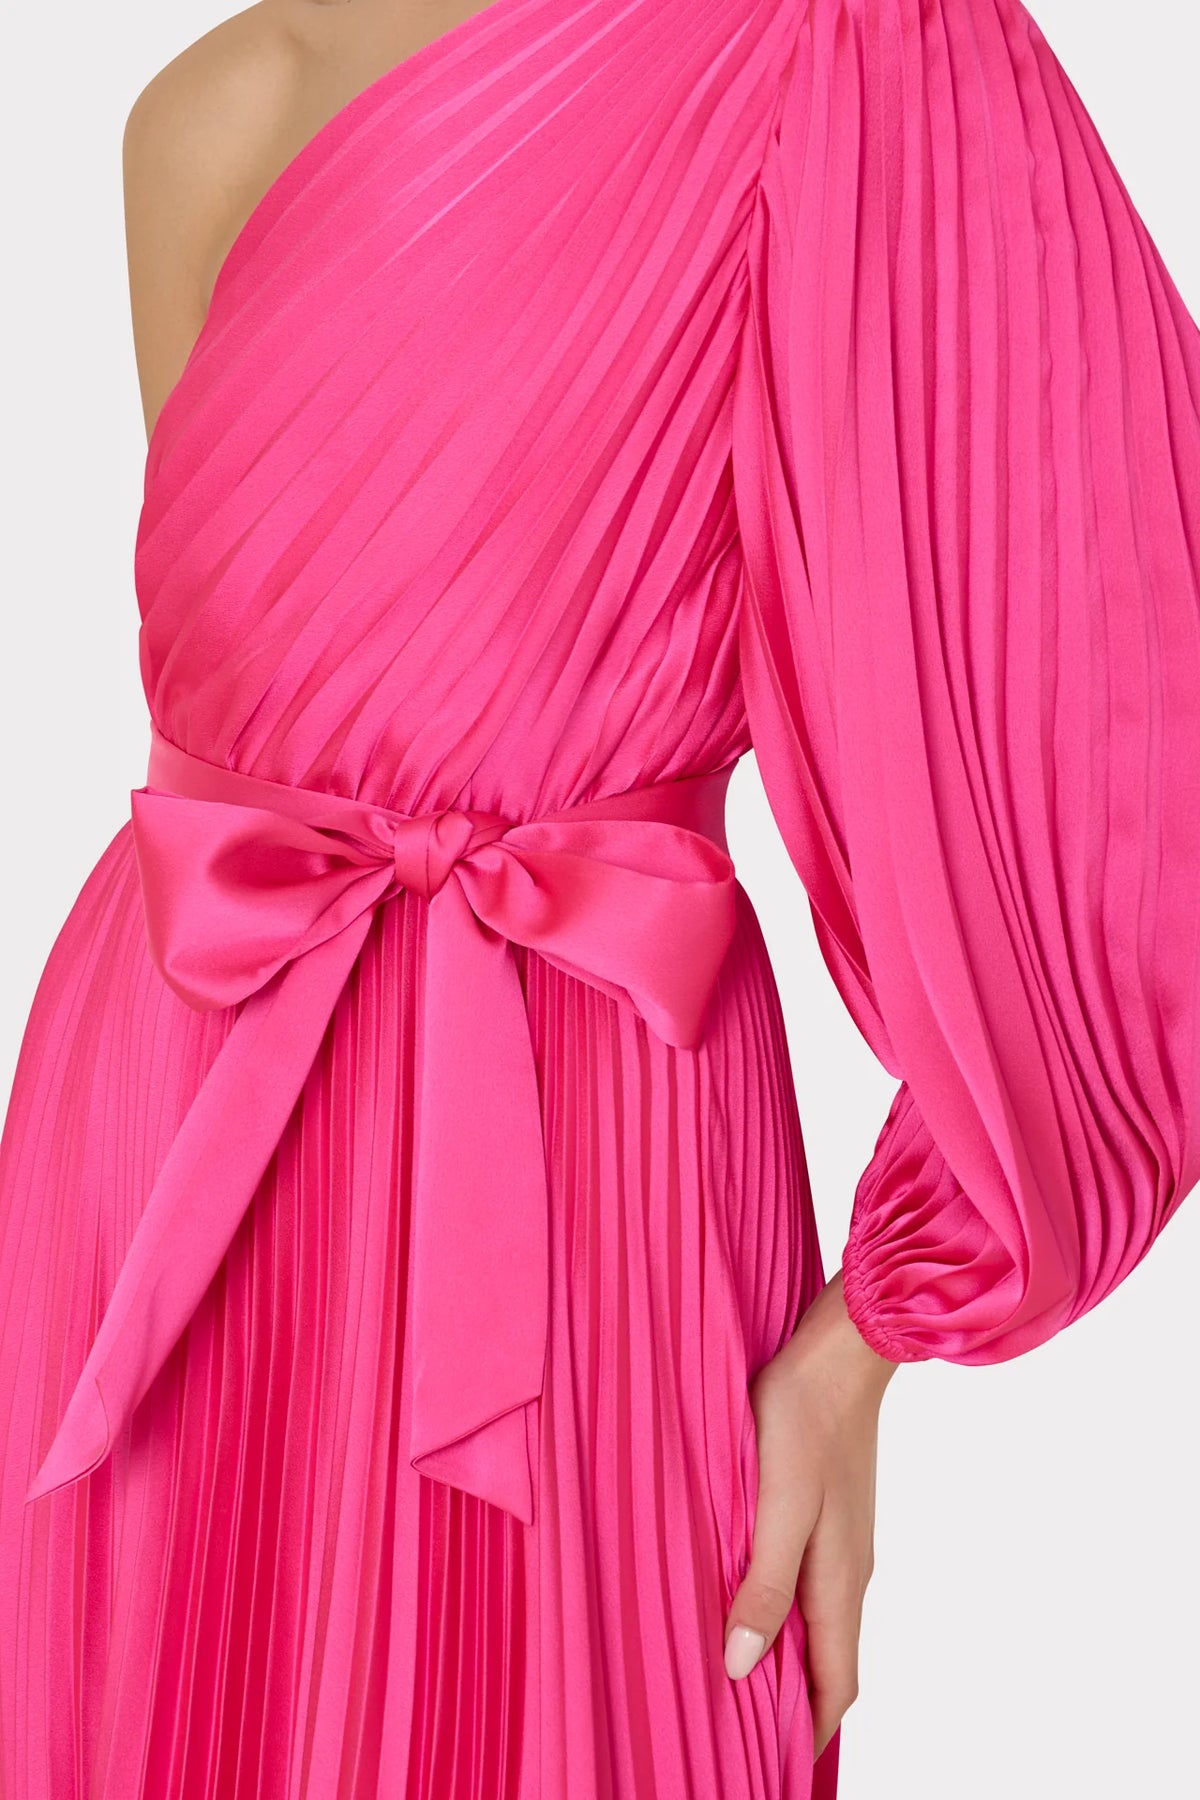 Essi Satin Pleated One Shoulder Dress in Pink